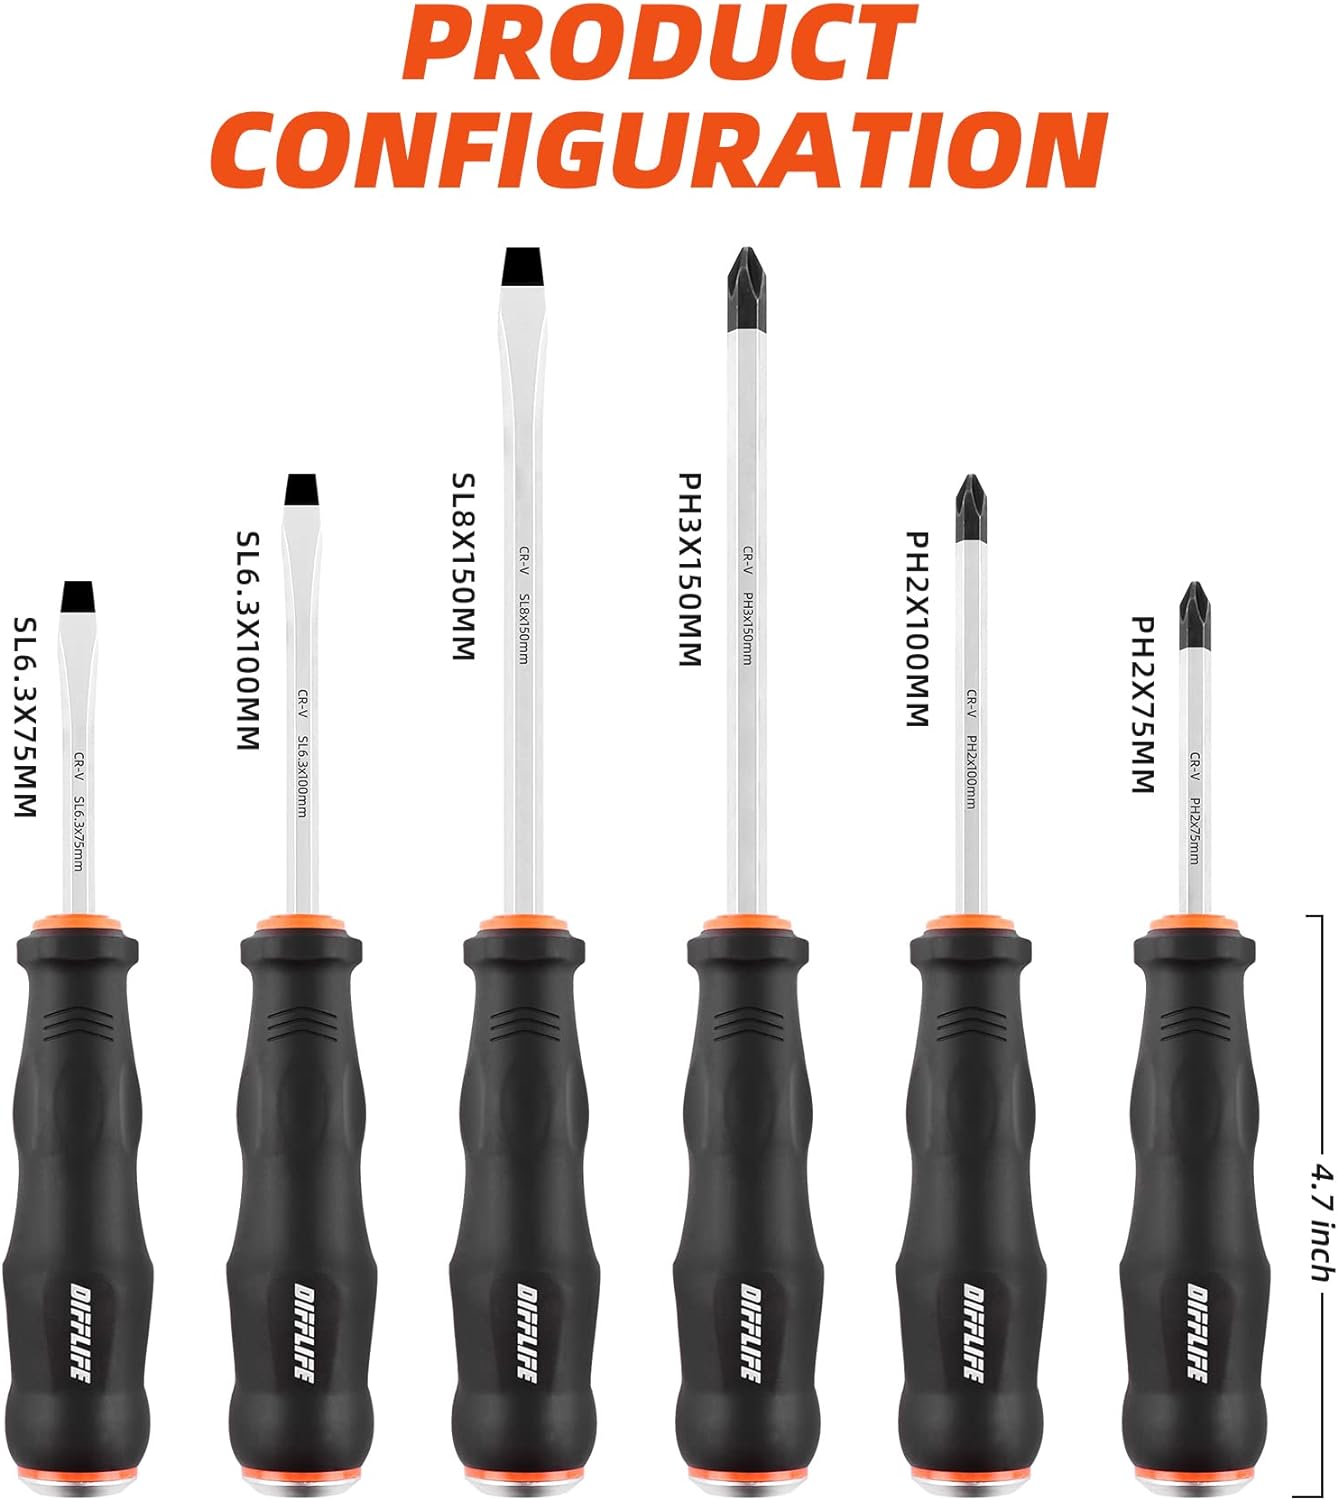 DIFFLIFE Screwdriver Sets Screwdriver Kit 6-Piece, Professional Cushion Grip Insulated Magnetic Tip Electrician Screwdriver Kits (6-Piec